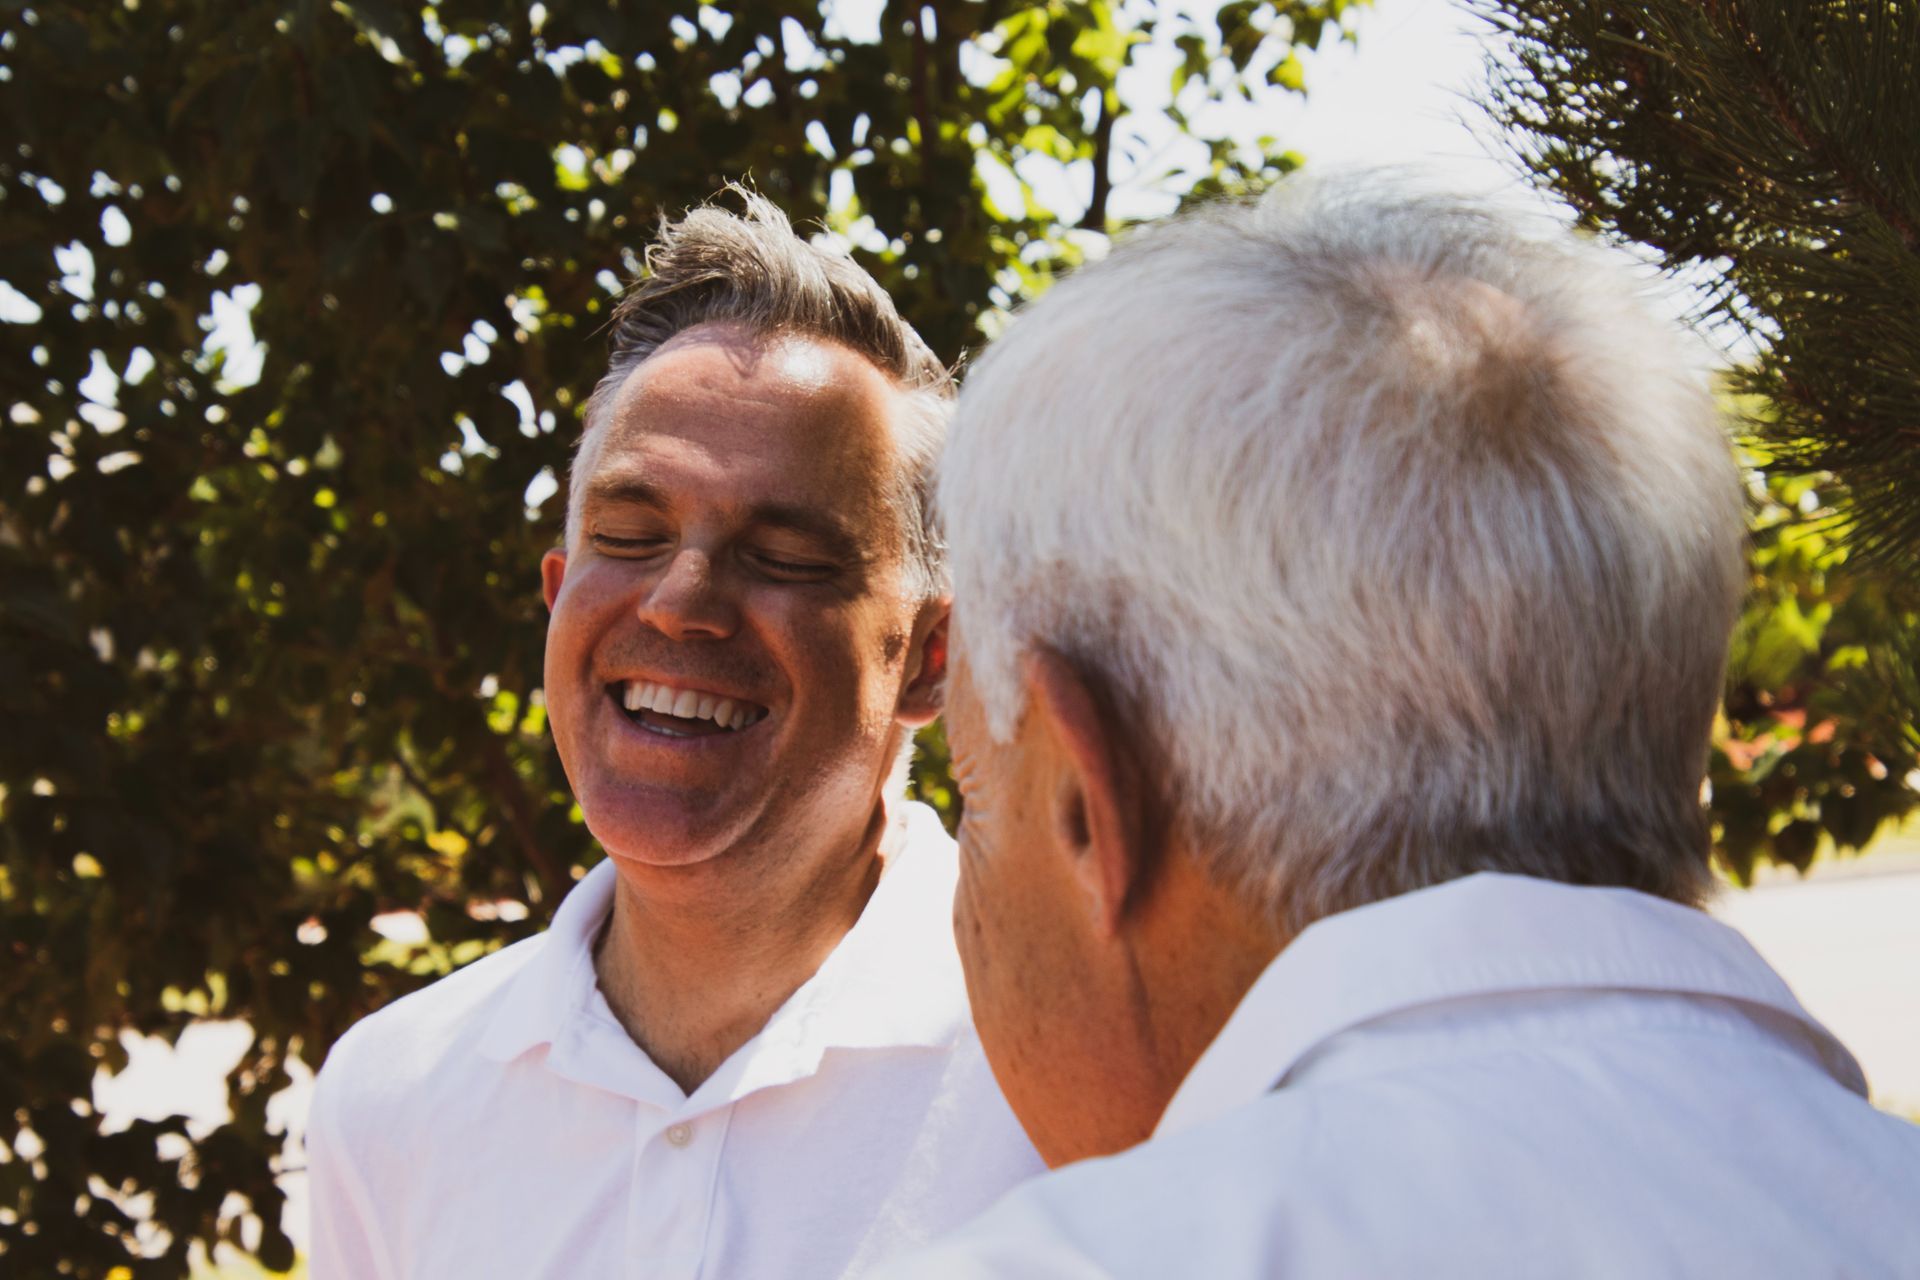 two men in white shirts are laughing with their eyes closed